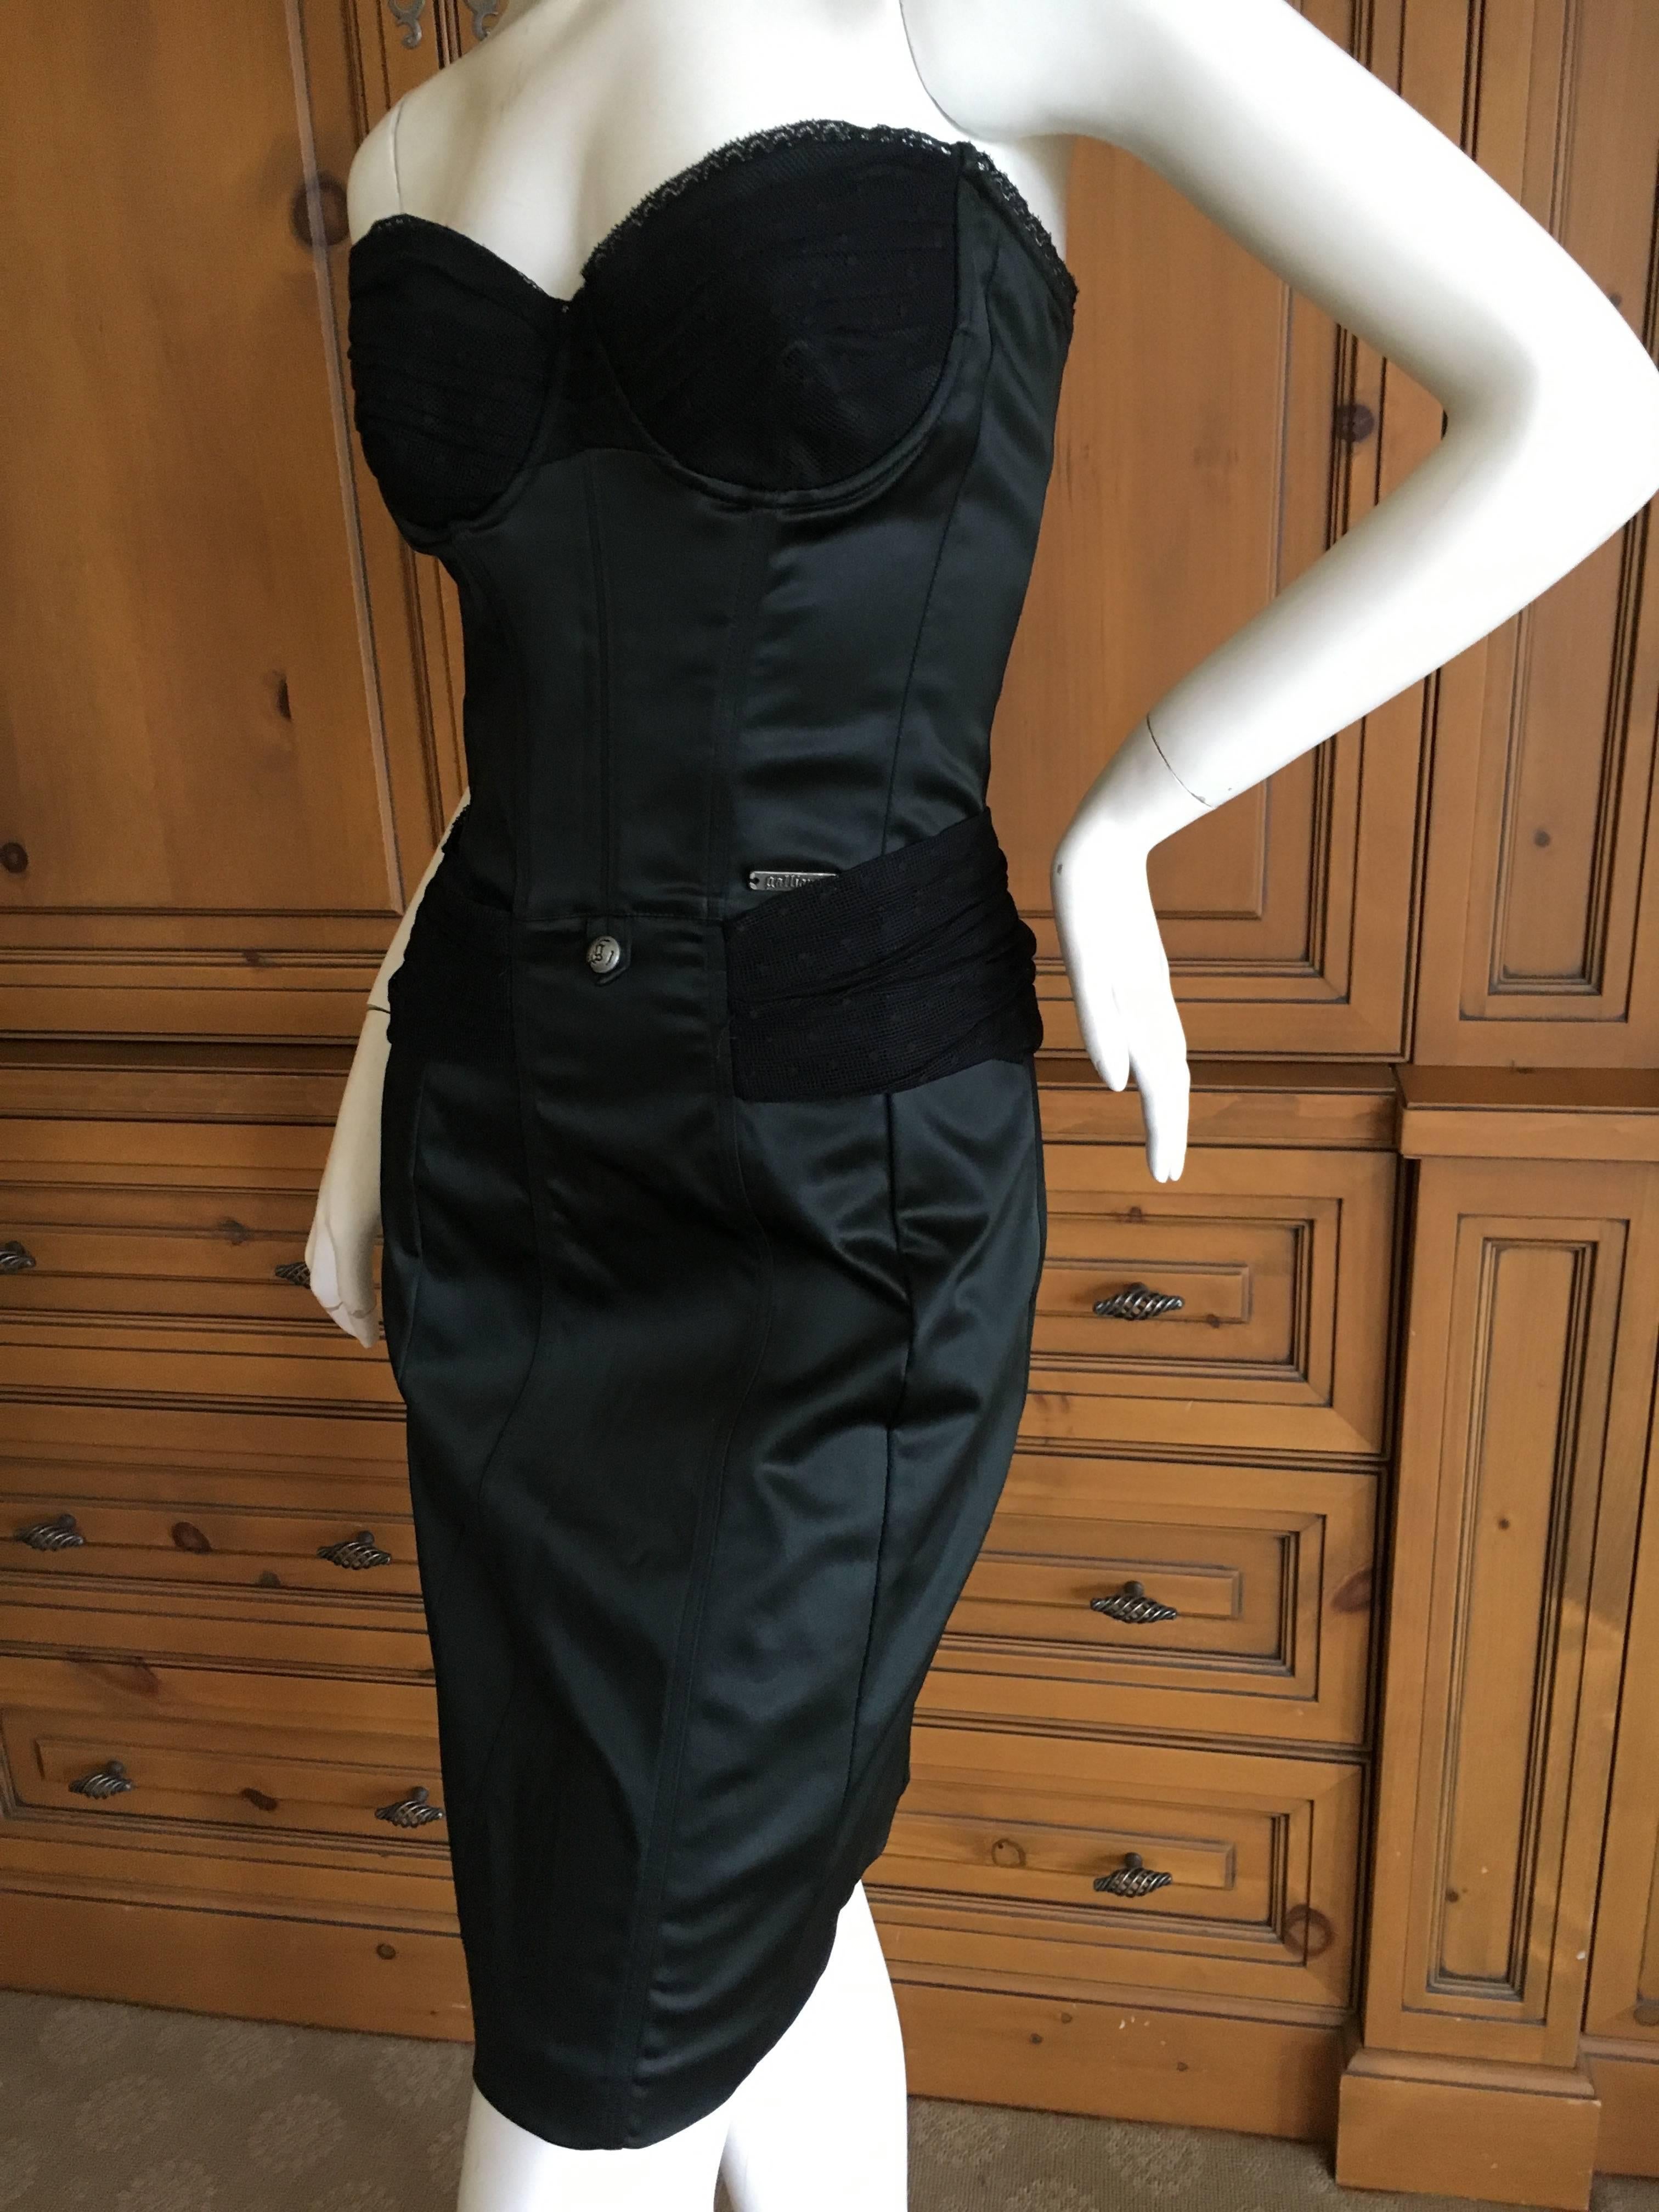 John Galliano Little Black Corset Dress In Excellent Condition For Sale In Cloverdale, CA